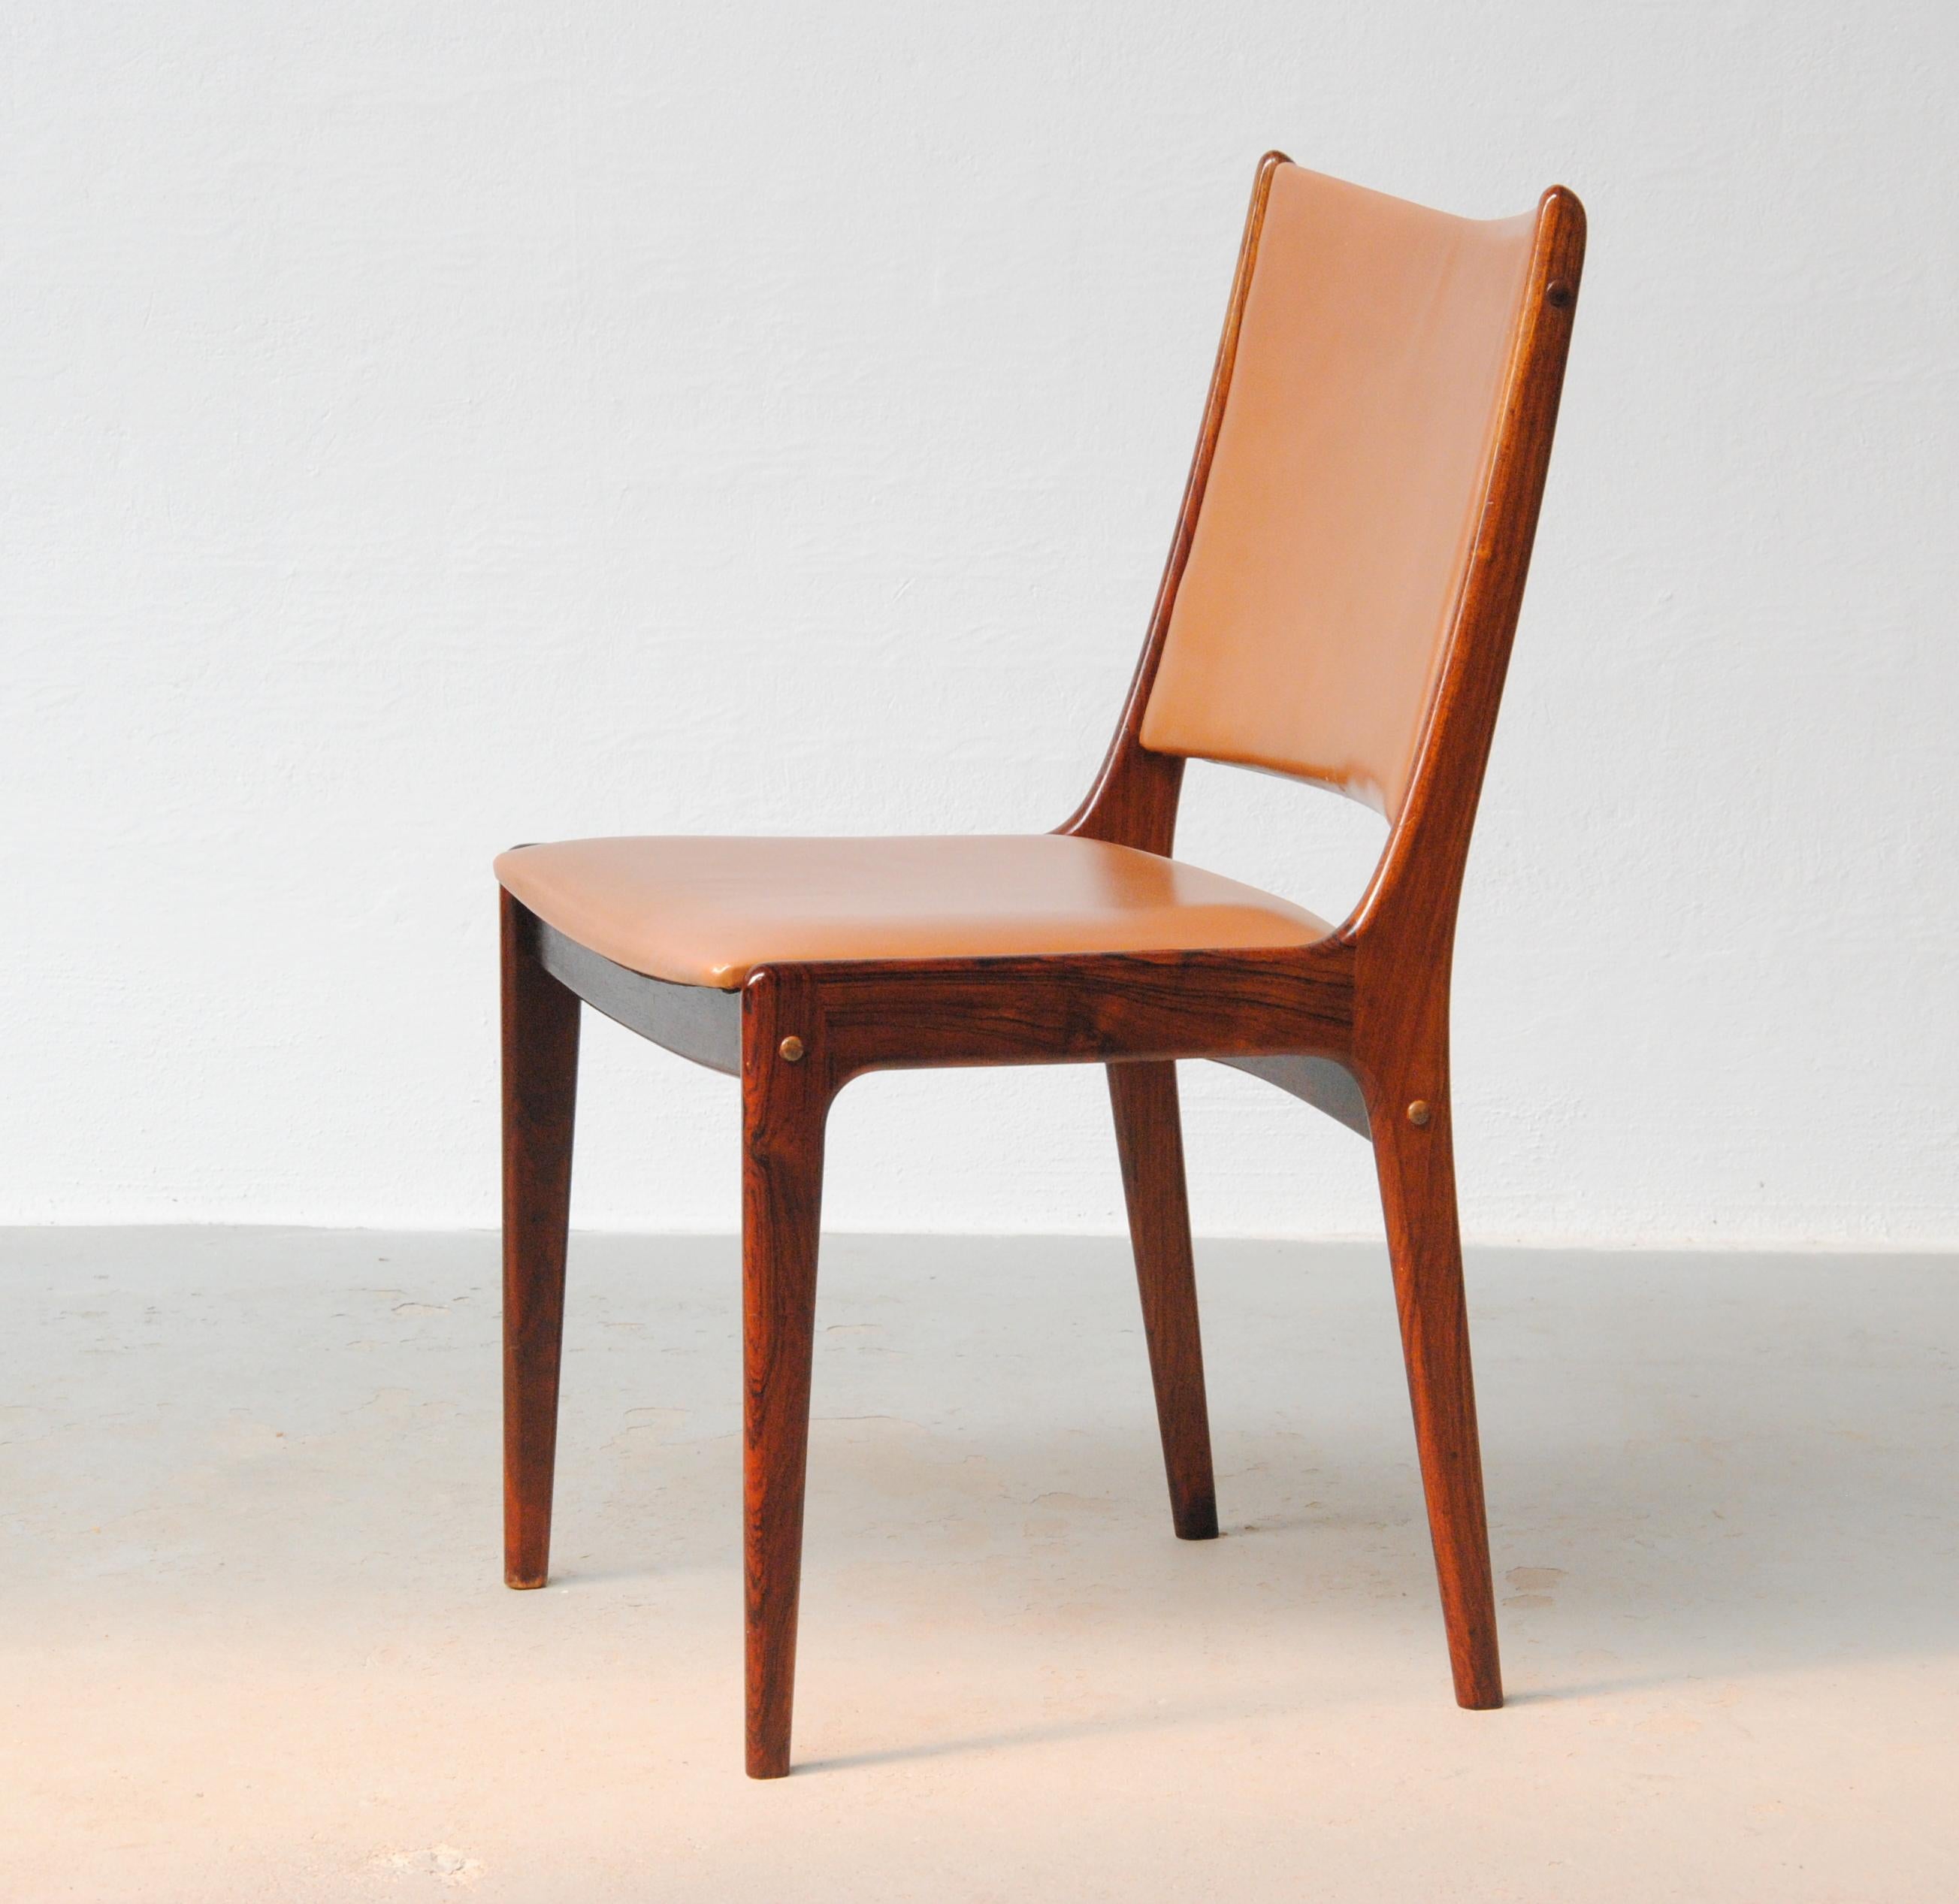 Four Restored Johannes Andersen Rosewood Dining Chairs Include Custom Upholstery In Good Condition For Sale In Knebel, DK